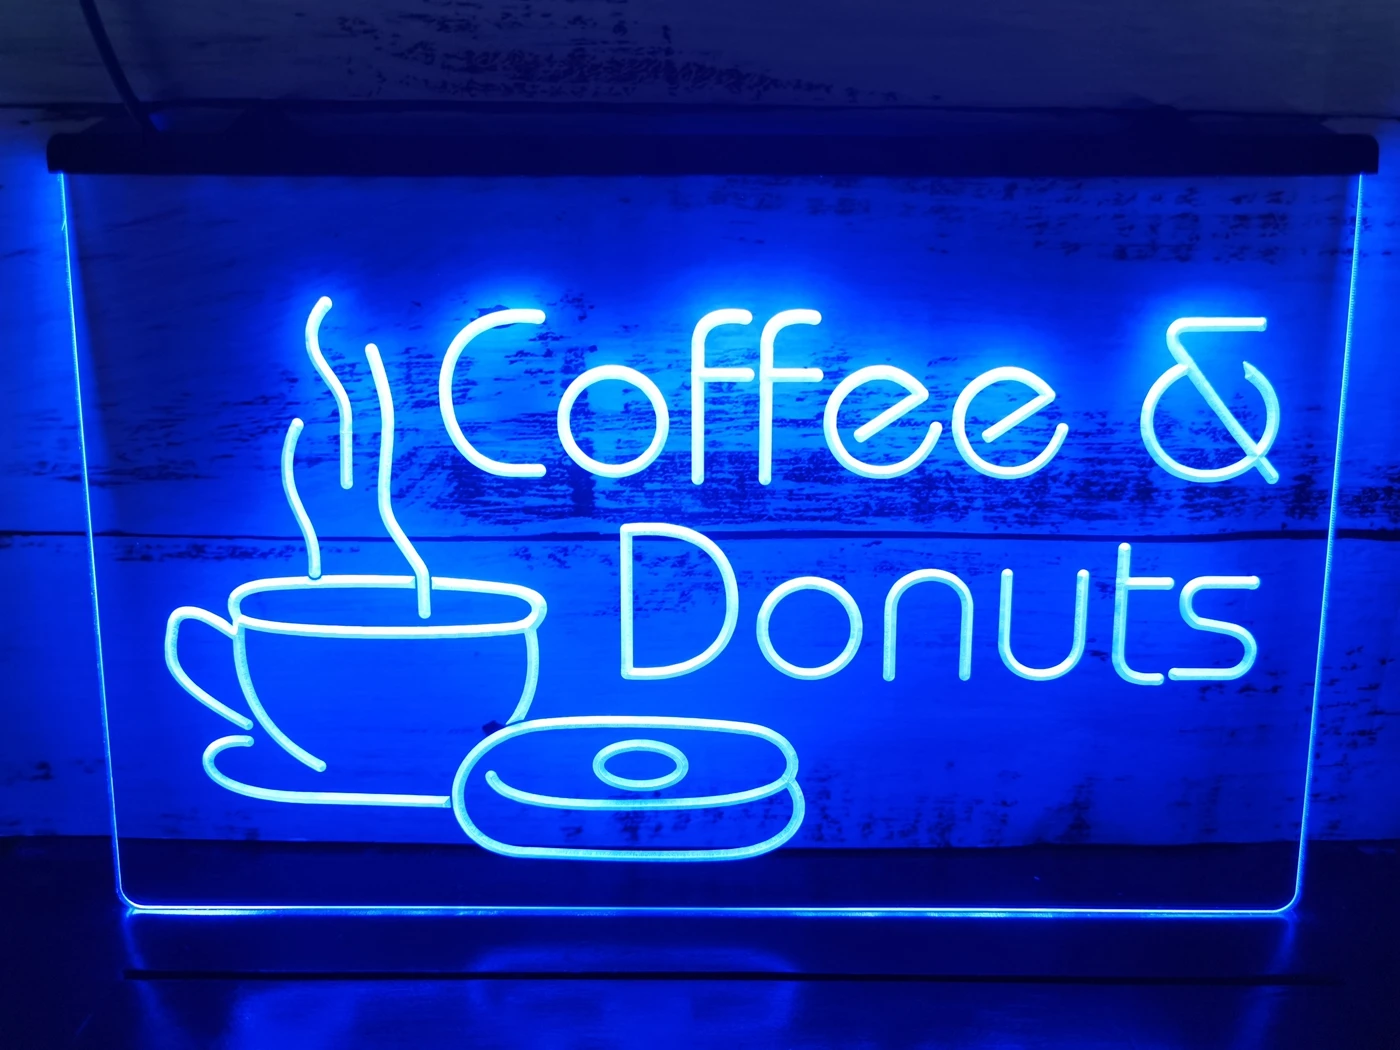 110010 OPEN Donuts Cafe Shop Bread Hot Coffee Display LED Light Sign 